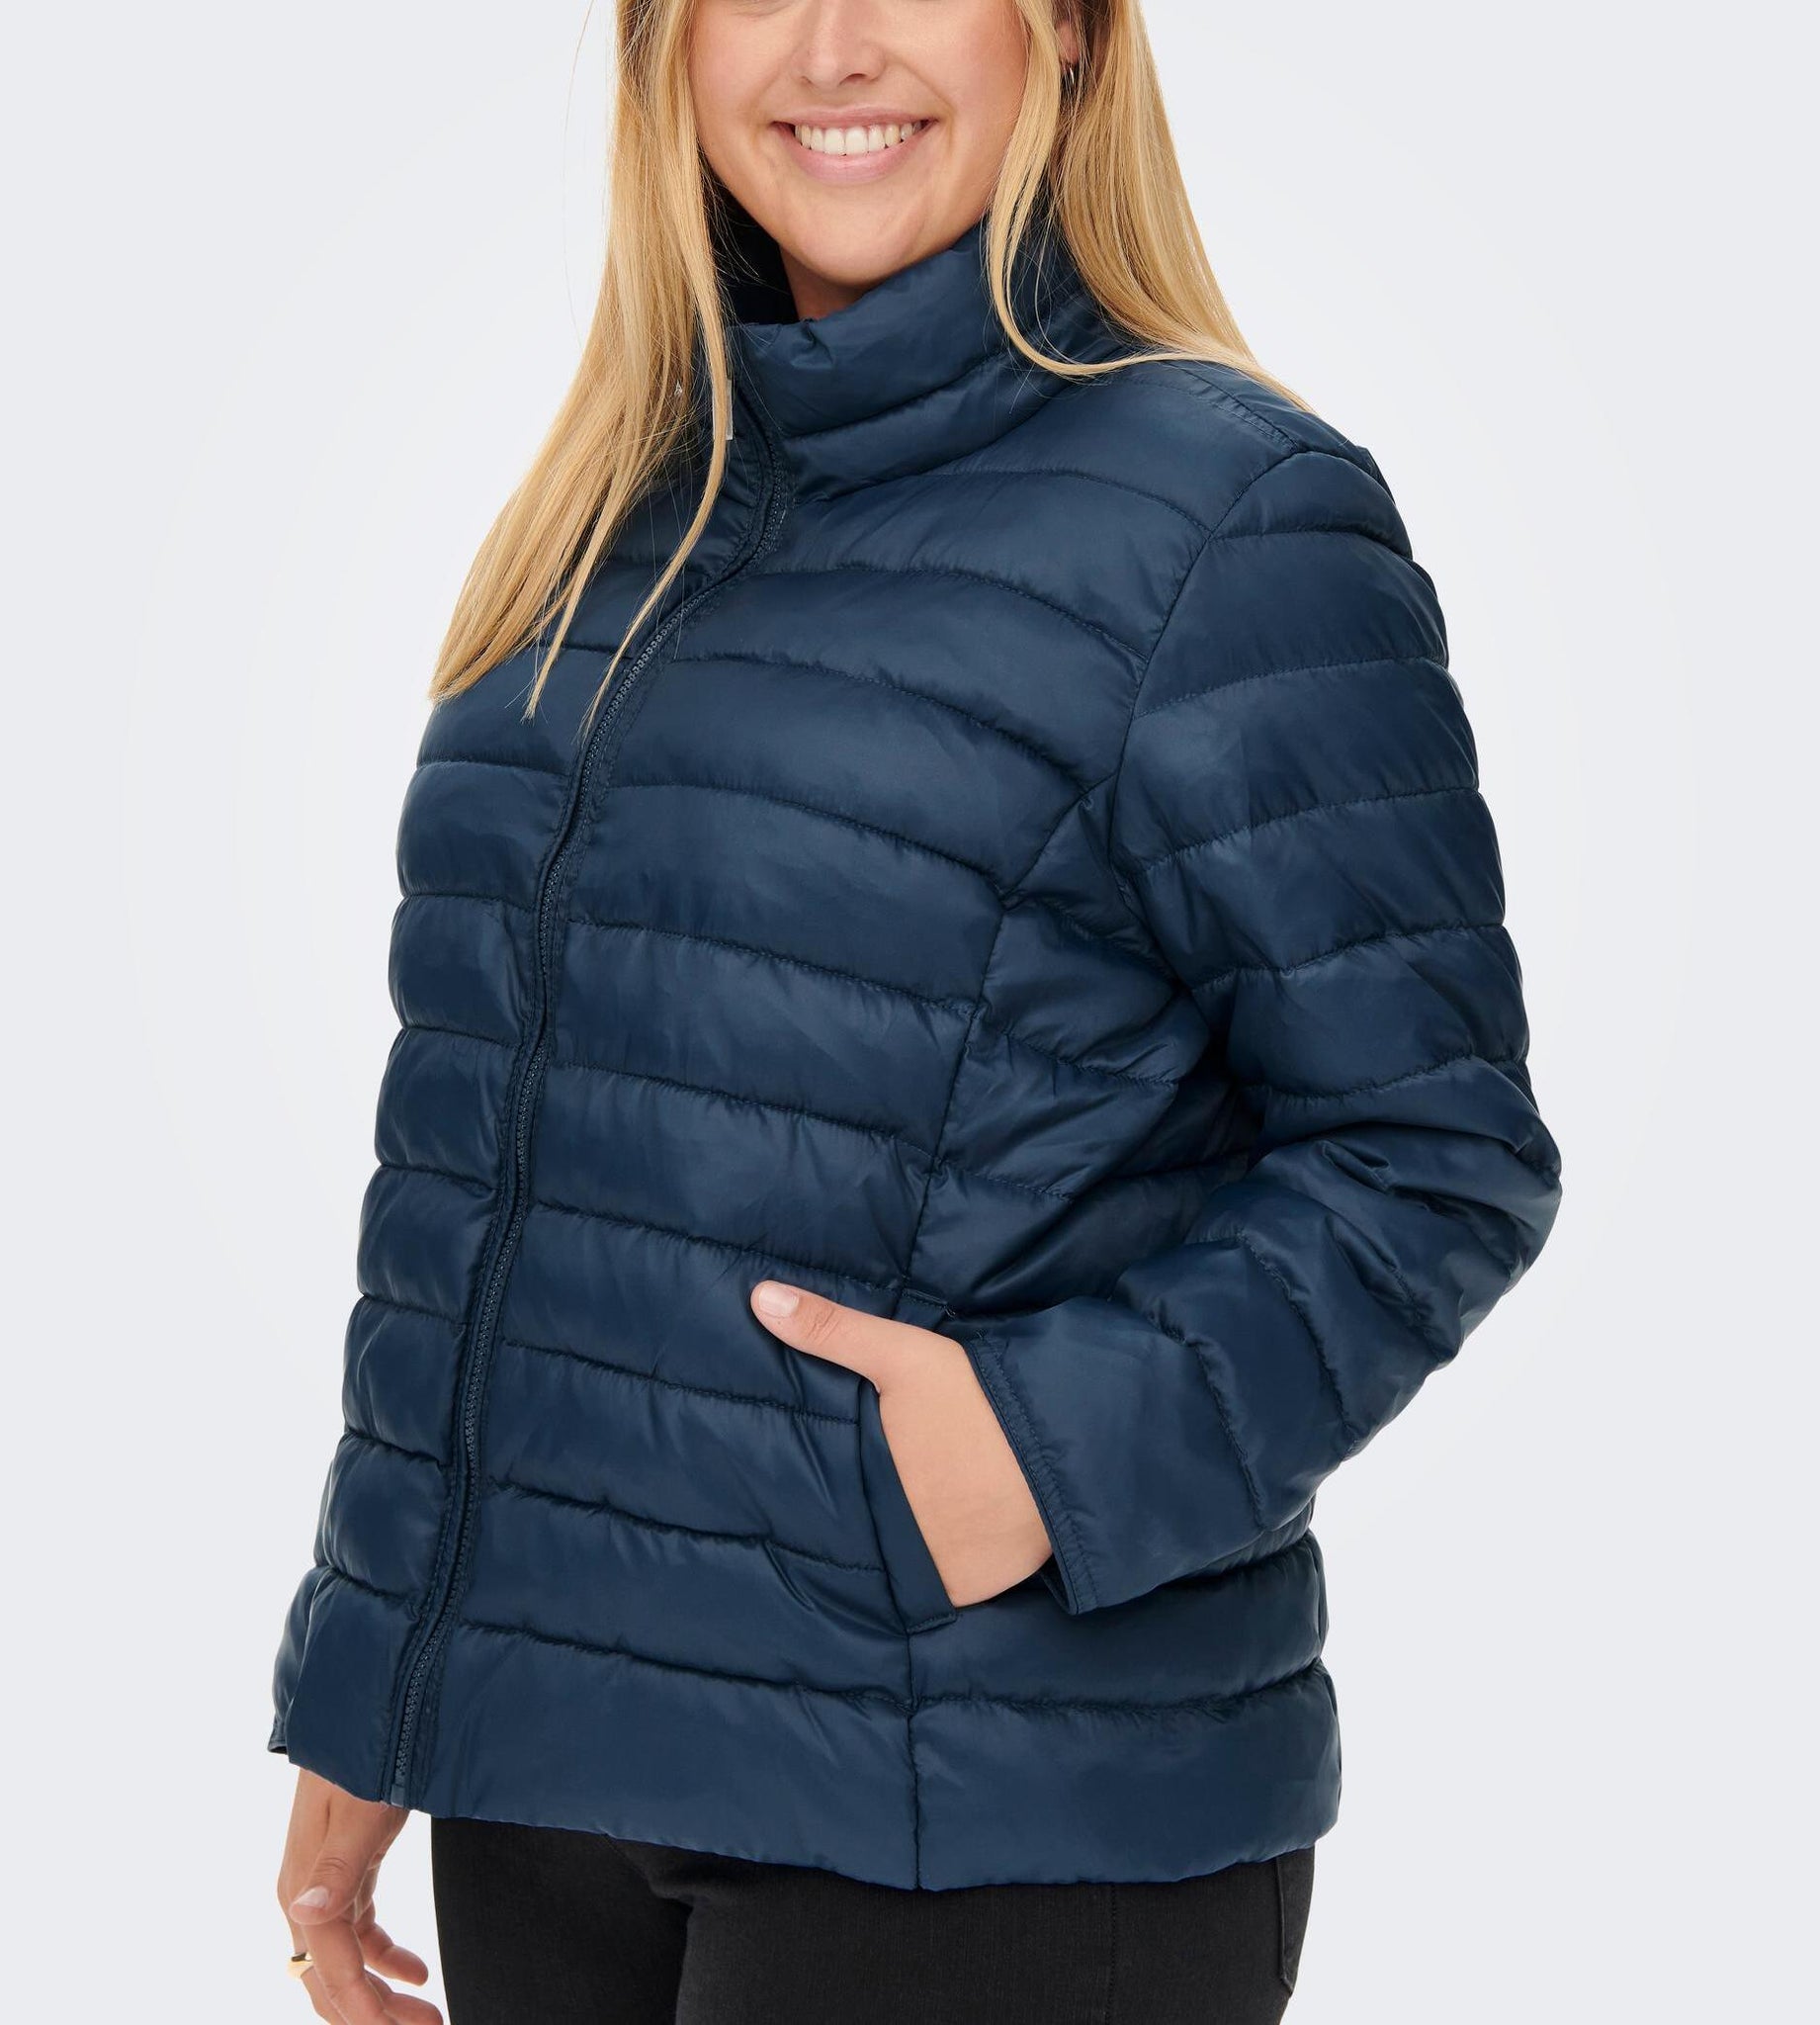 CARTAHOE QUILTED JACKET